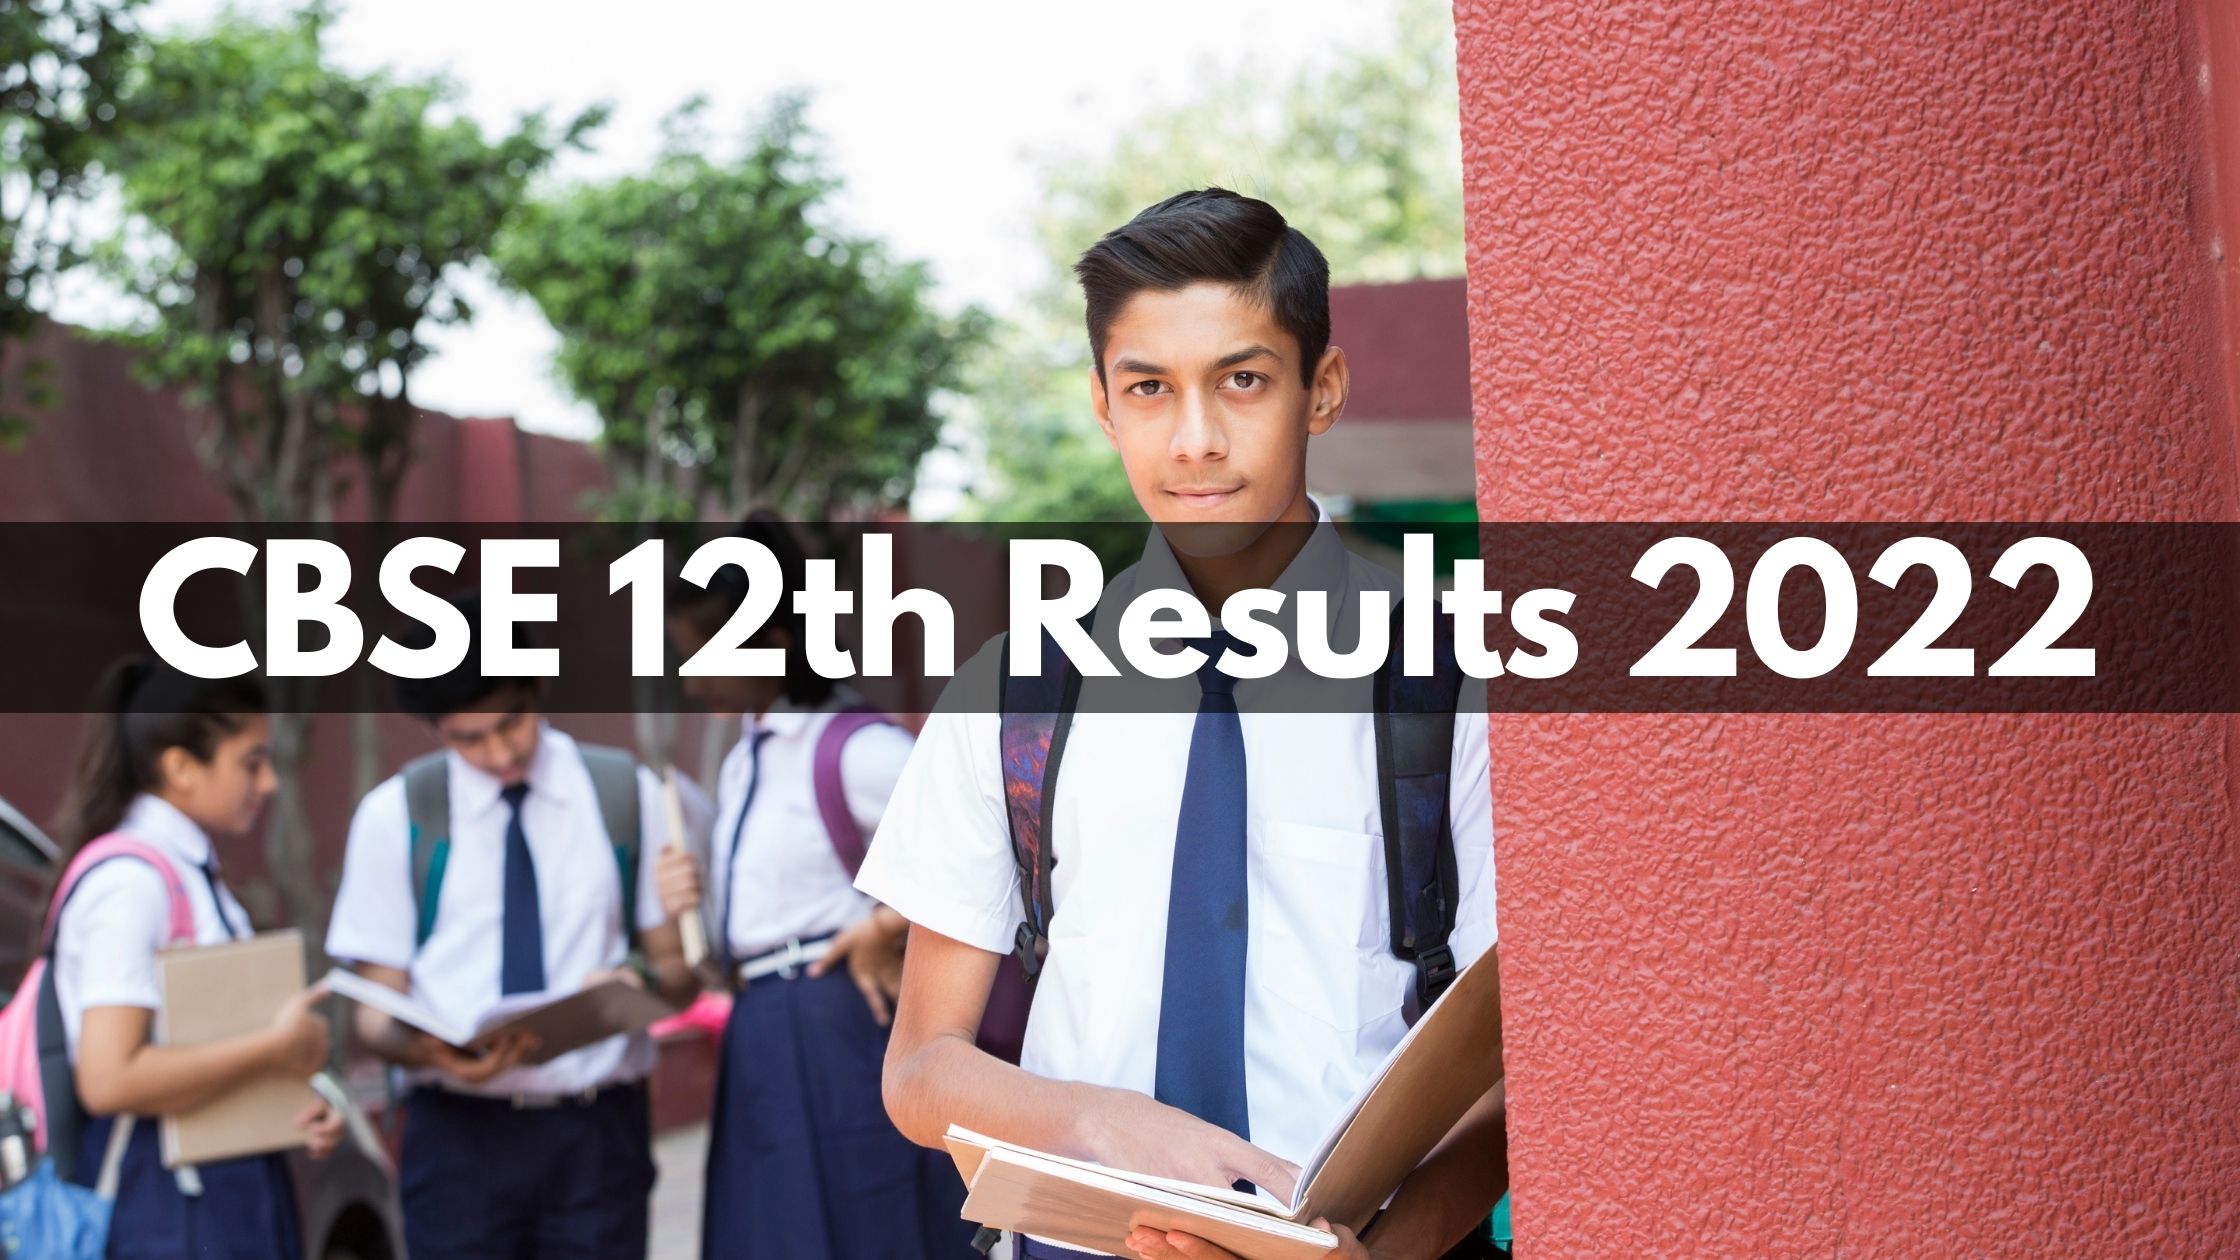 CBSE 12th Results 2022